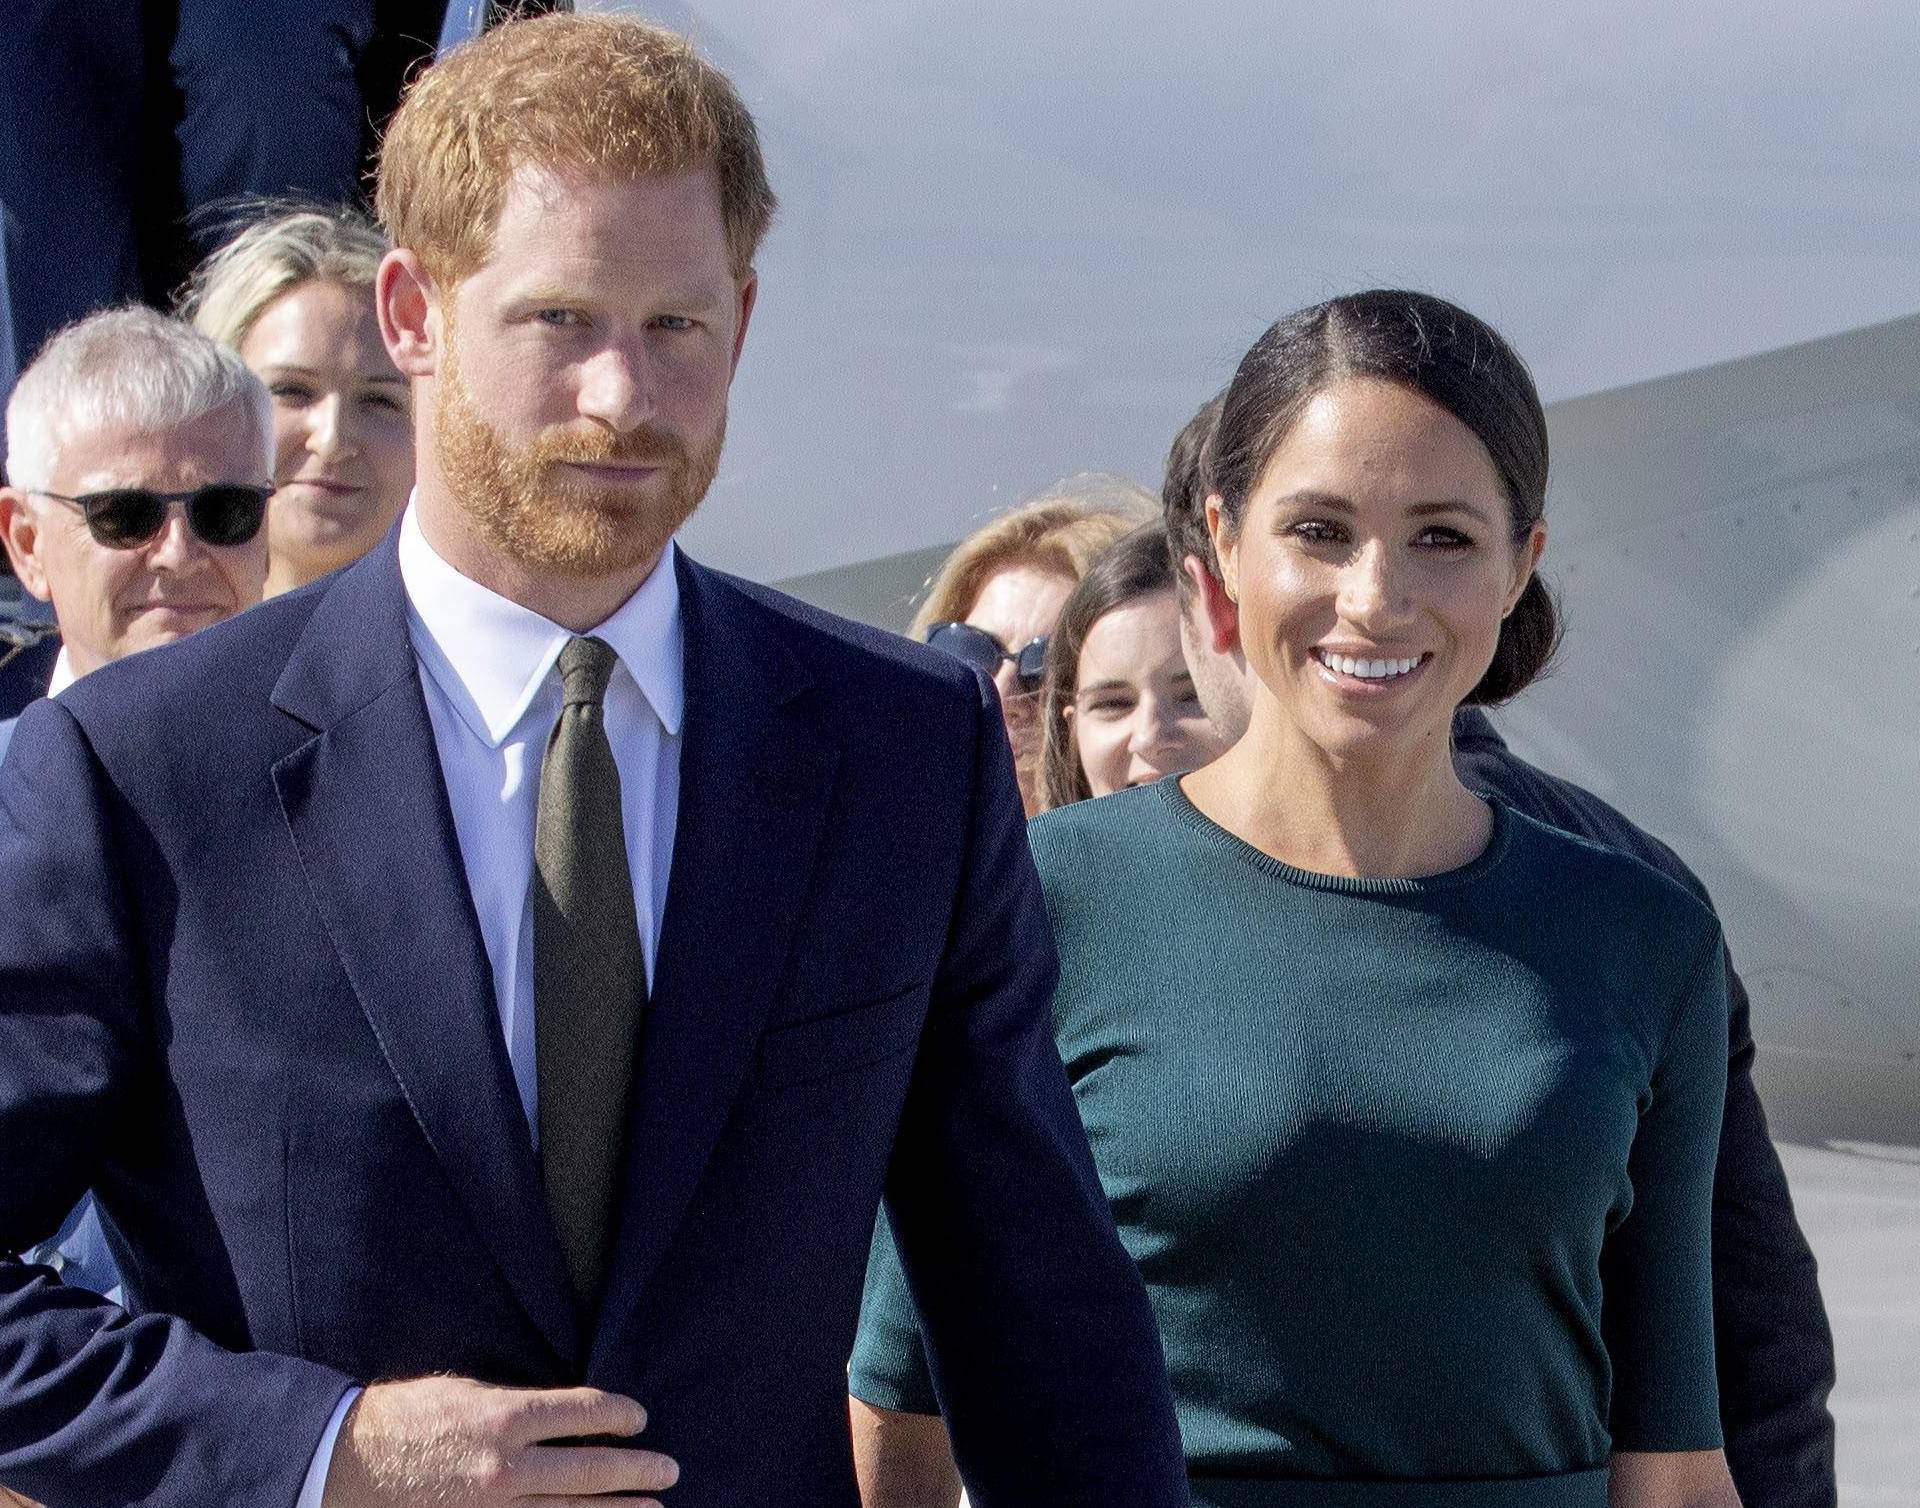 1st of a 2 days visit from The Duke and Duchess of Sussex to Dublin   Albert Nieboer / Netherlands OUT / Point de Vue OUT